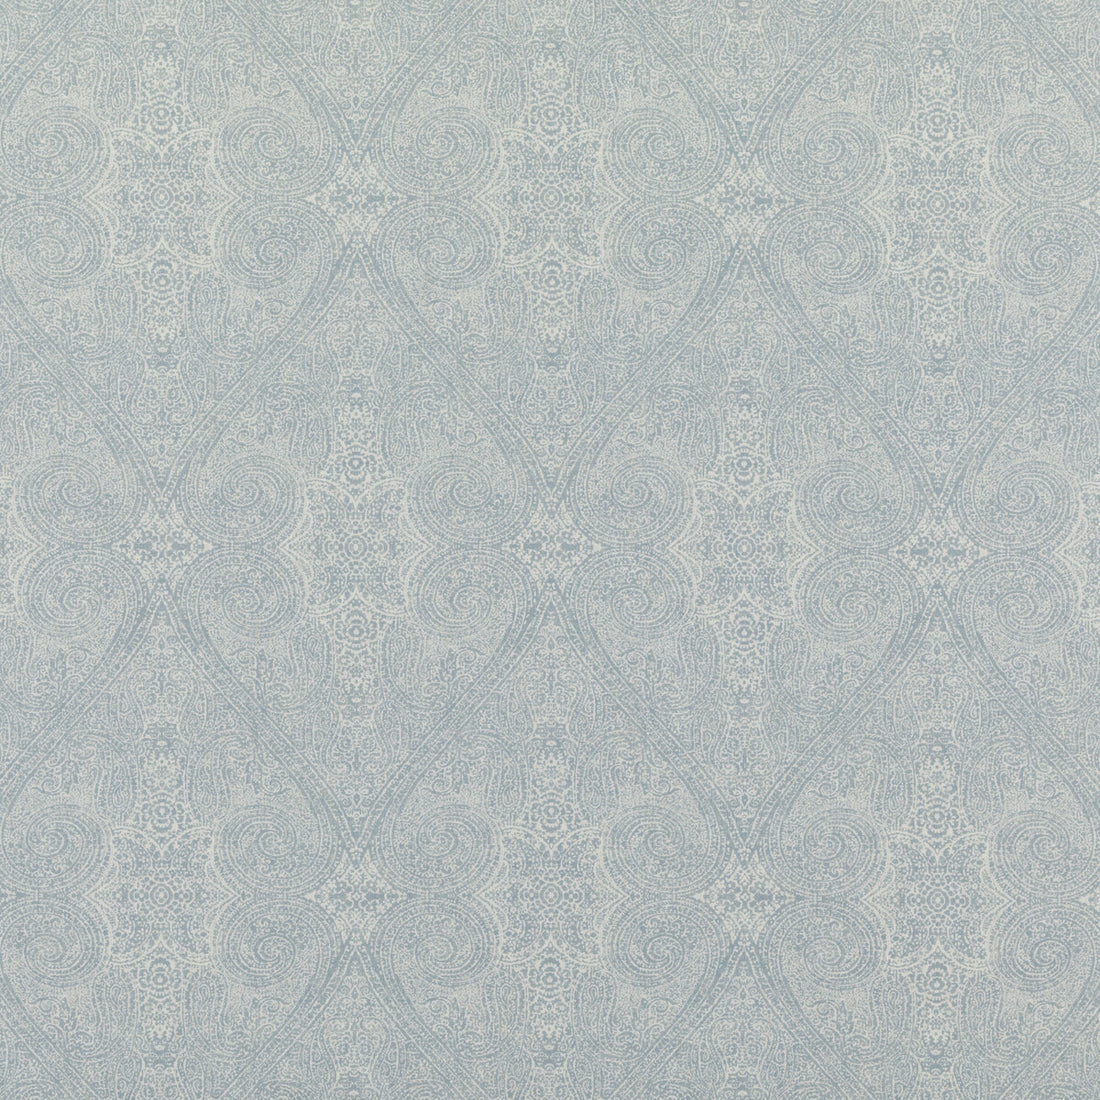 Marida fabric in soft blue color - pattern PP50449.3.0 - by Baker Lifestyle in the Homes &amp; Gardens III collection